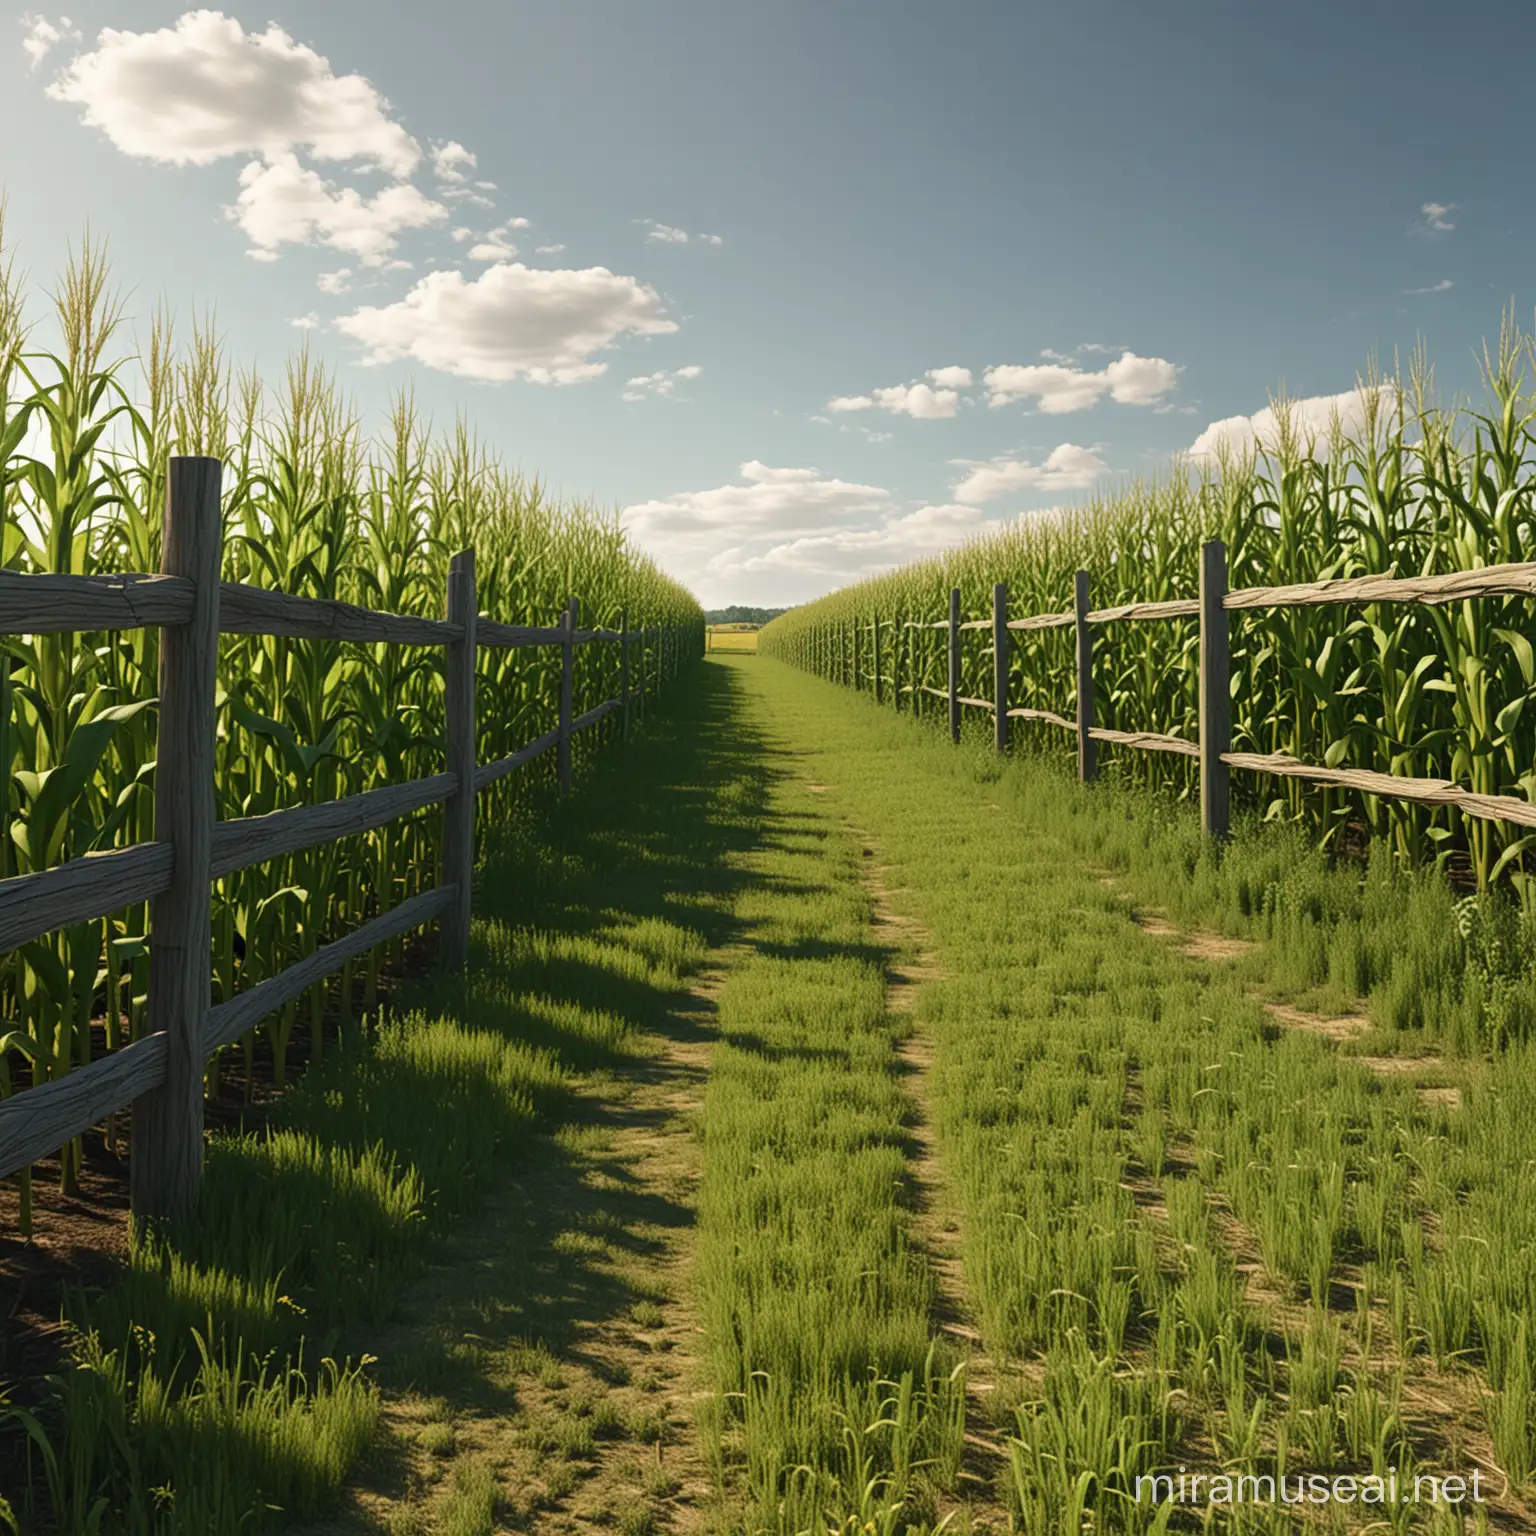 Vibrant Corn Field Landscape with Wooden Fence in 4K HD Photorealistic Nature Scene